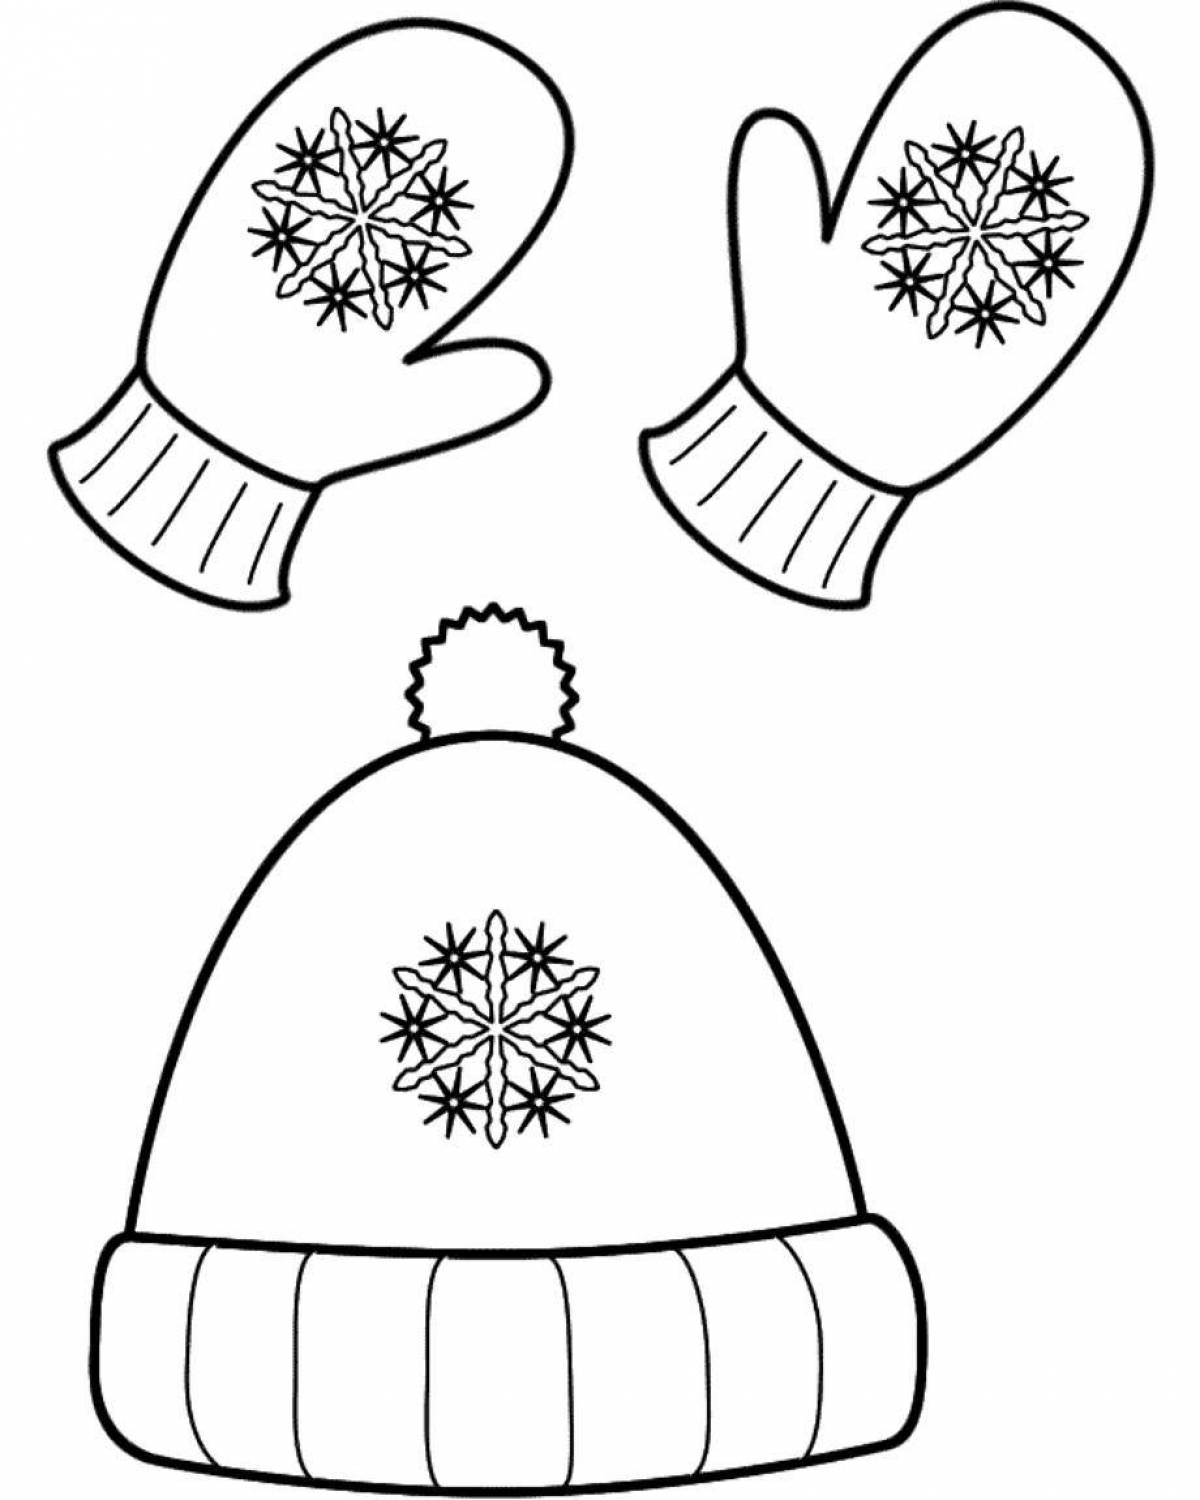 Shiny mitten coloring book for kids